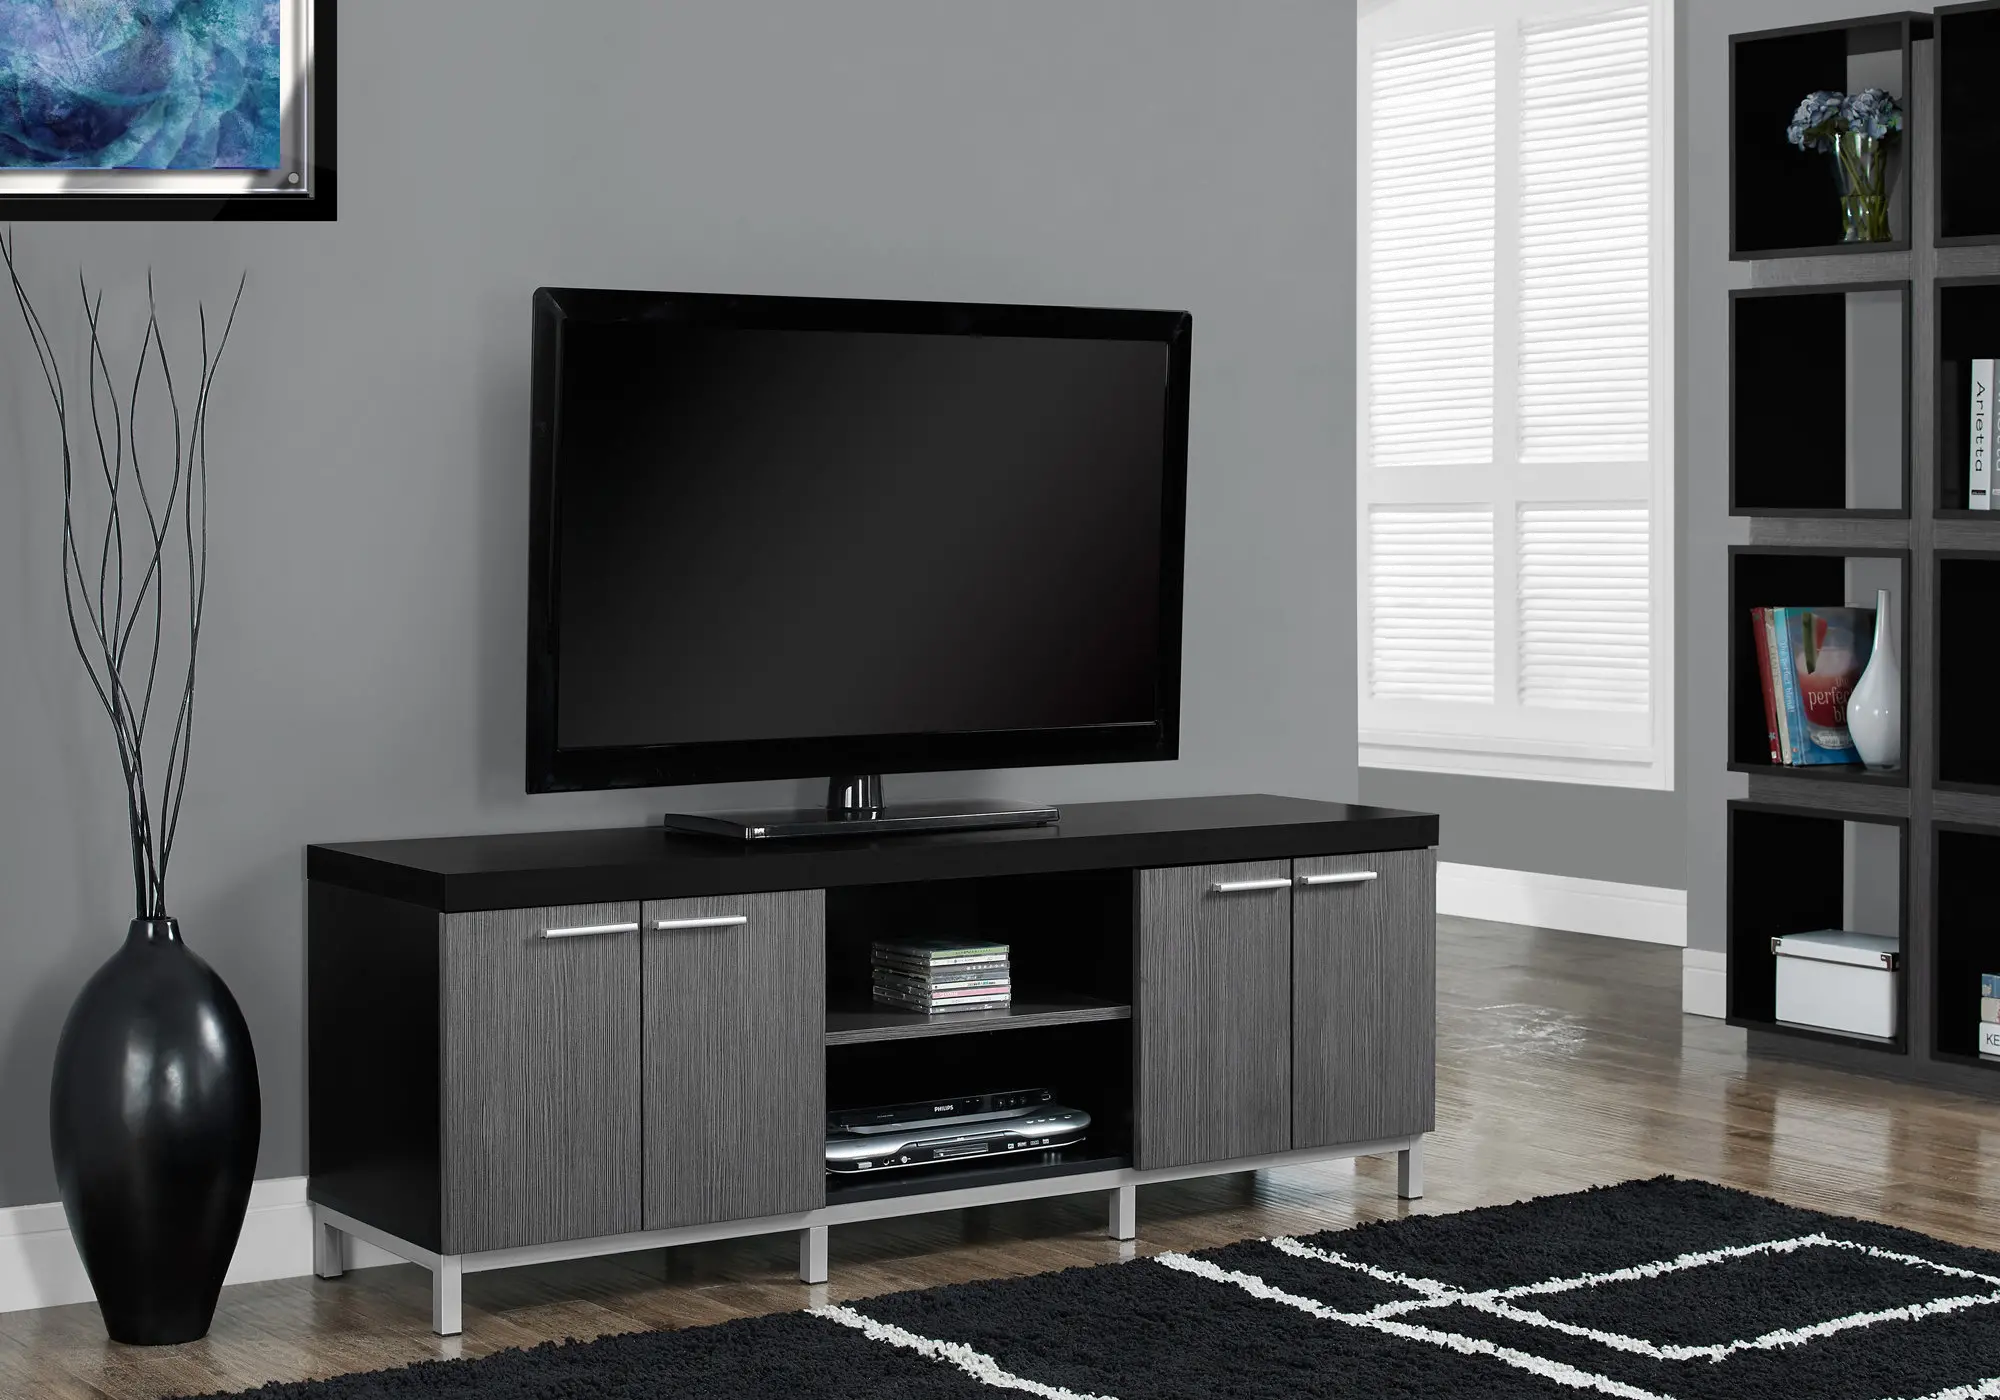 Photos - Mount/Stand Monarch Specialties Contemporary 60 Inch Black TV Stand I 2590 